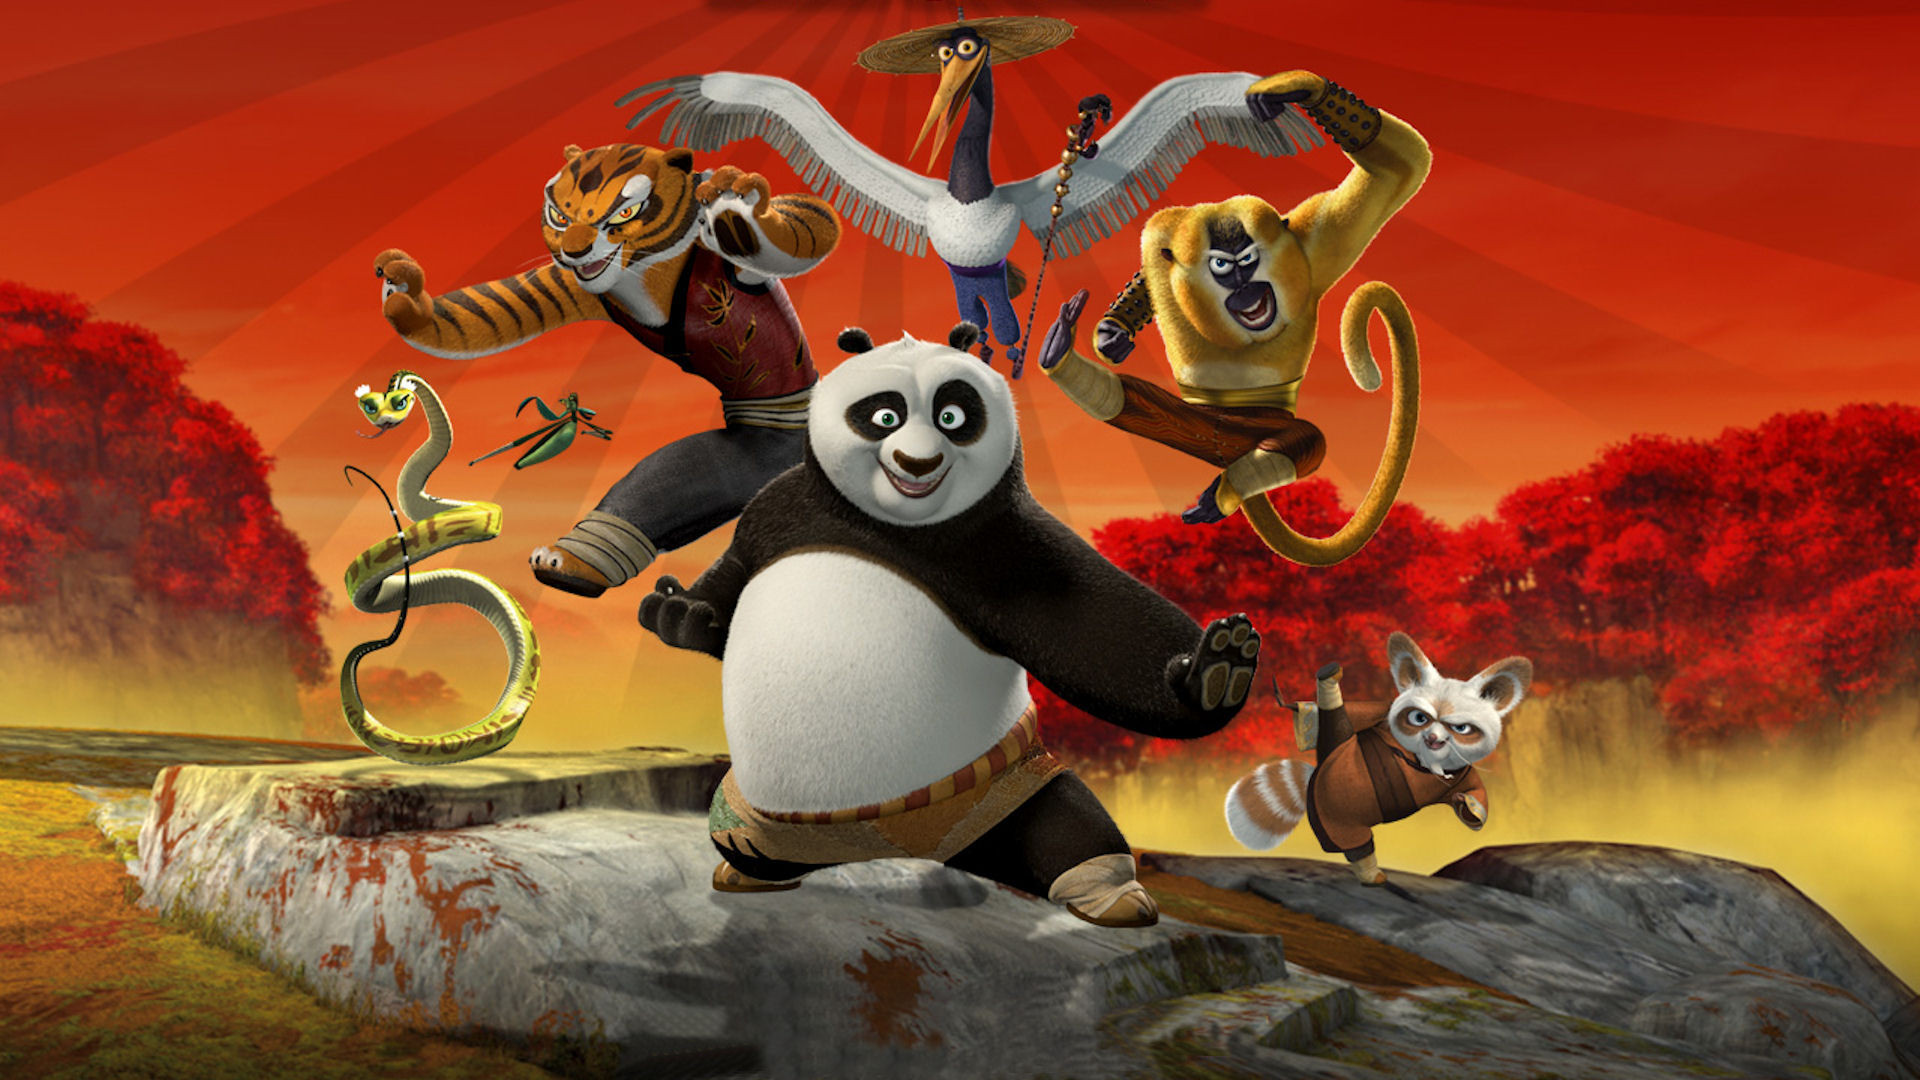 Android Kung Fu Panda 3 Wallpaper Full HD Pictures